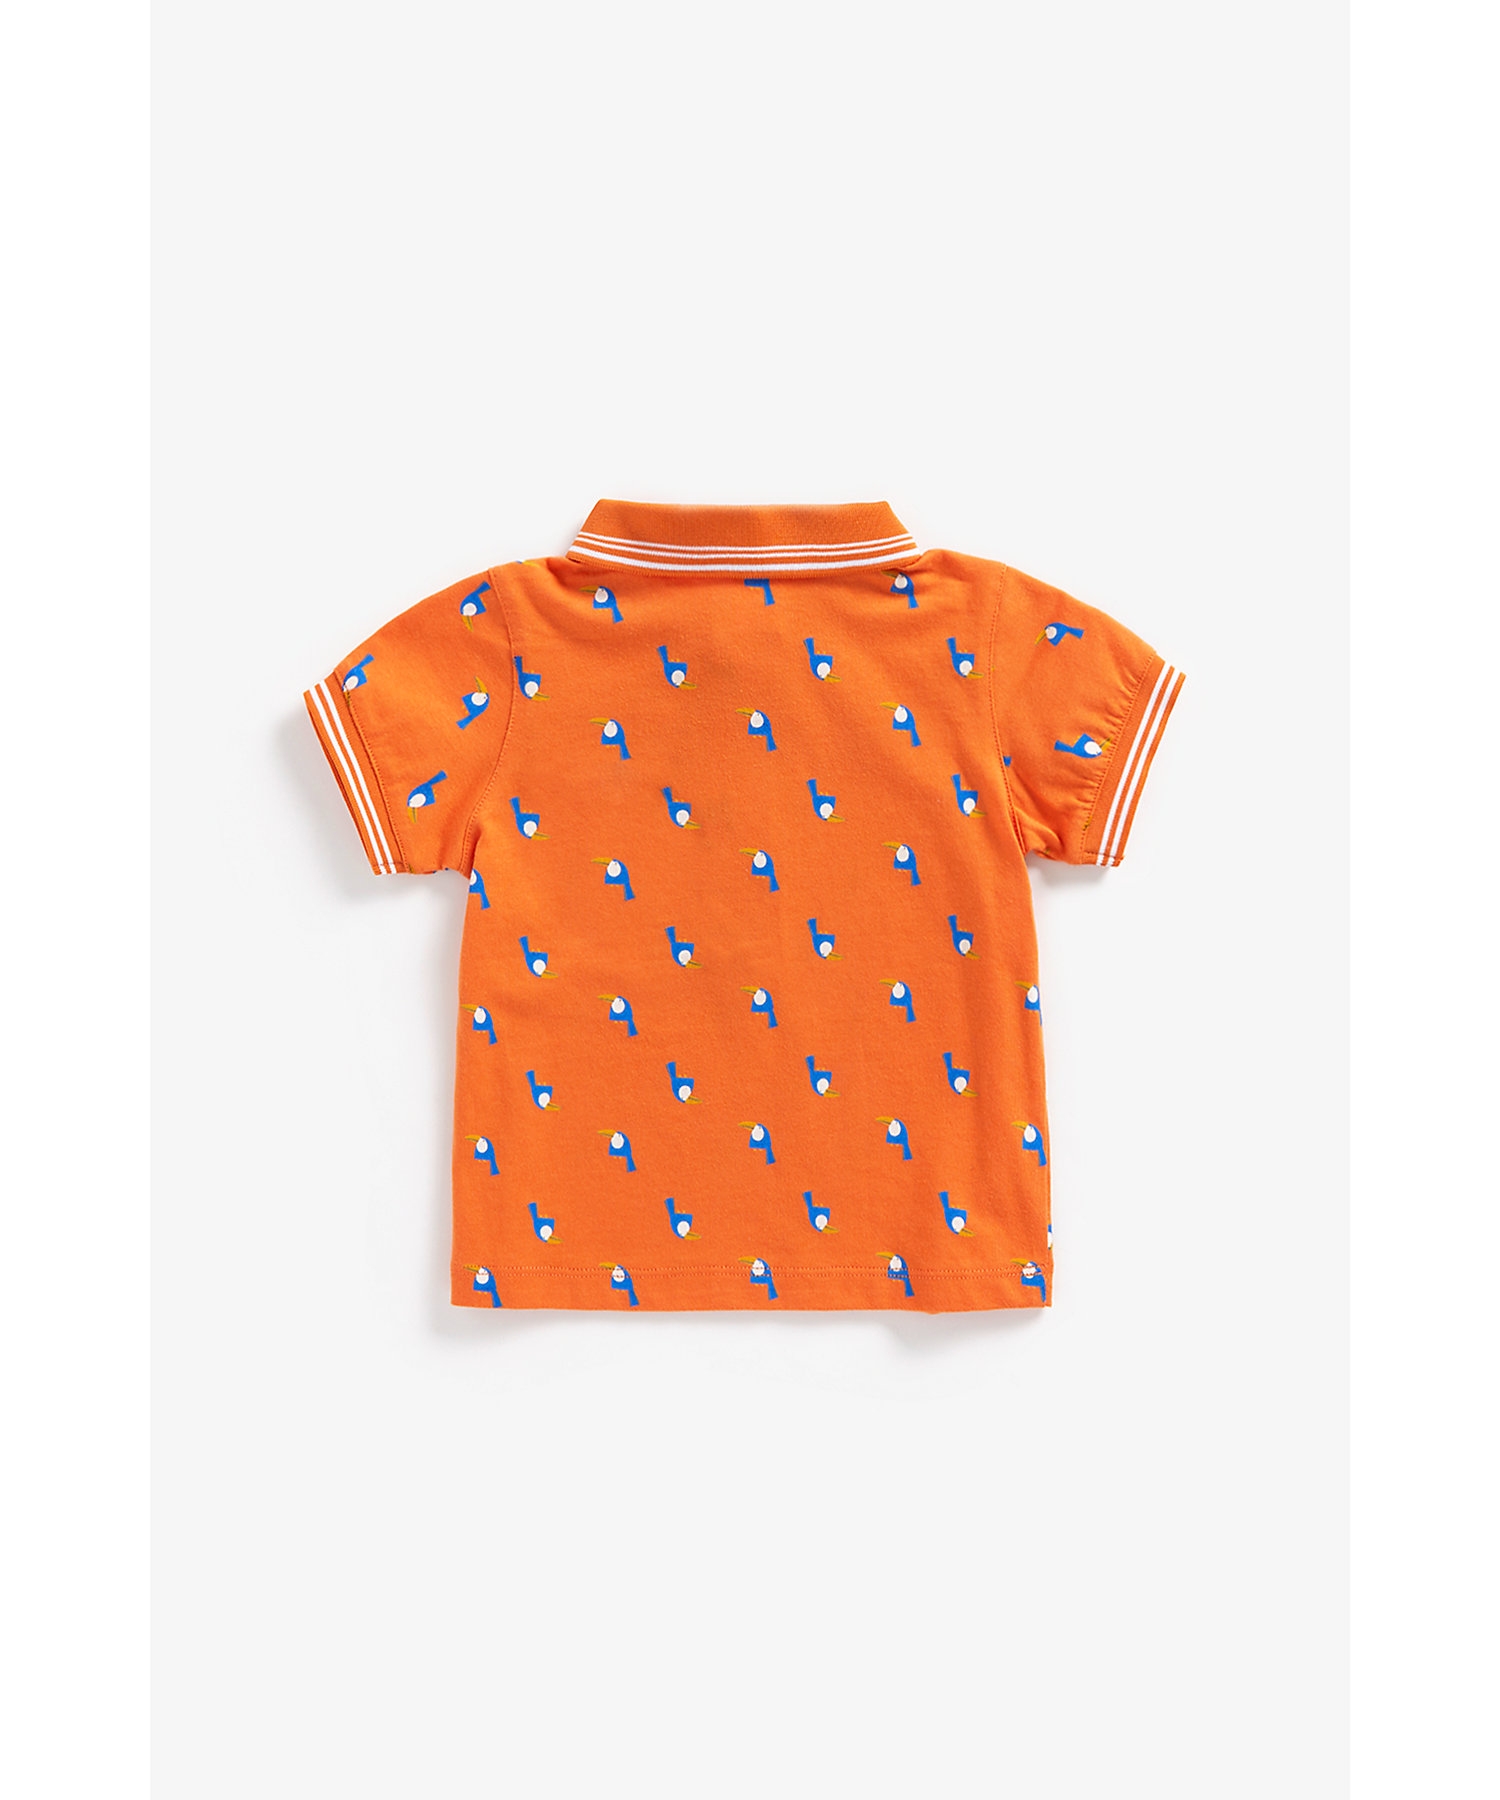 Boys Short Sleeves Polo T-Shirt All Over Printed -Orange